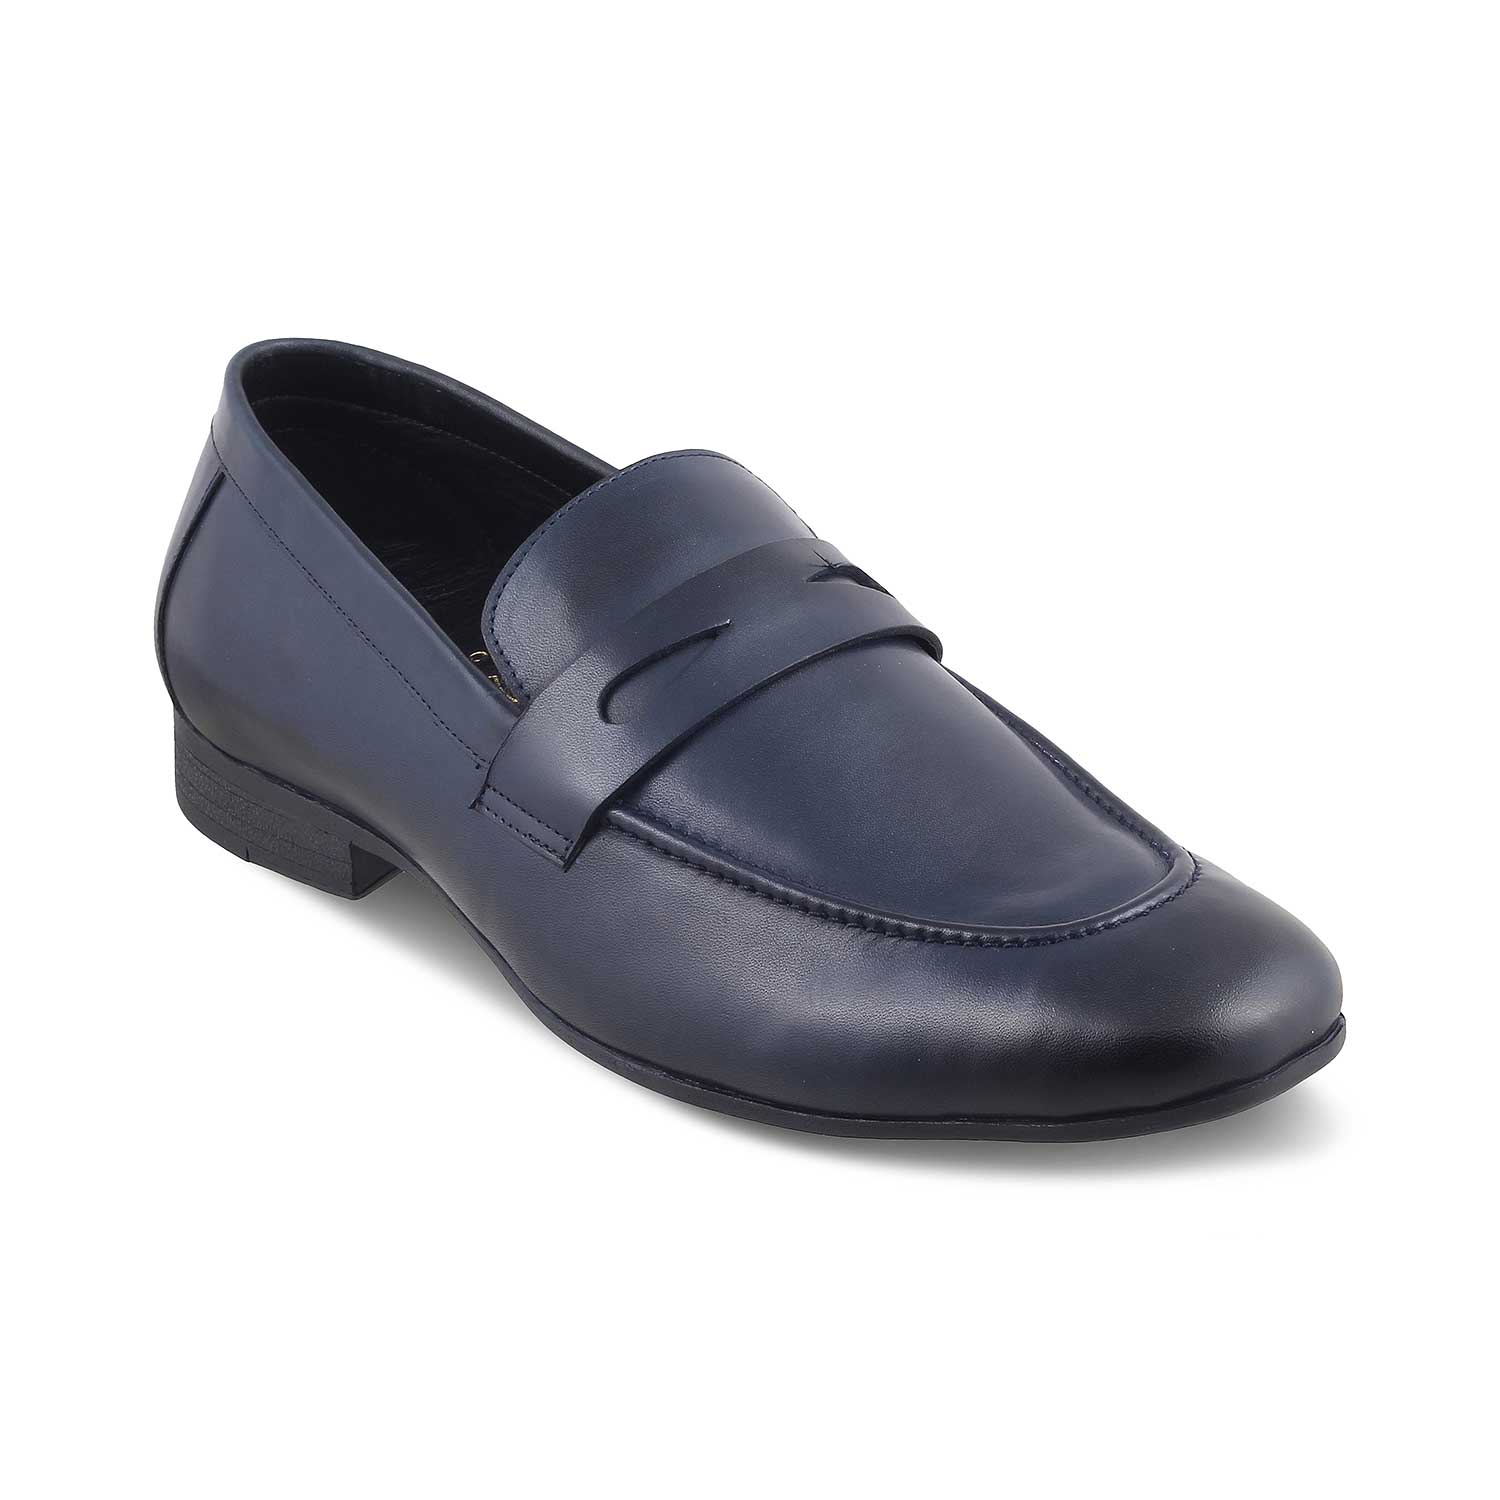 Apenny Blue Men's Leather Penny Loafers Online at Tresmode.com